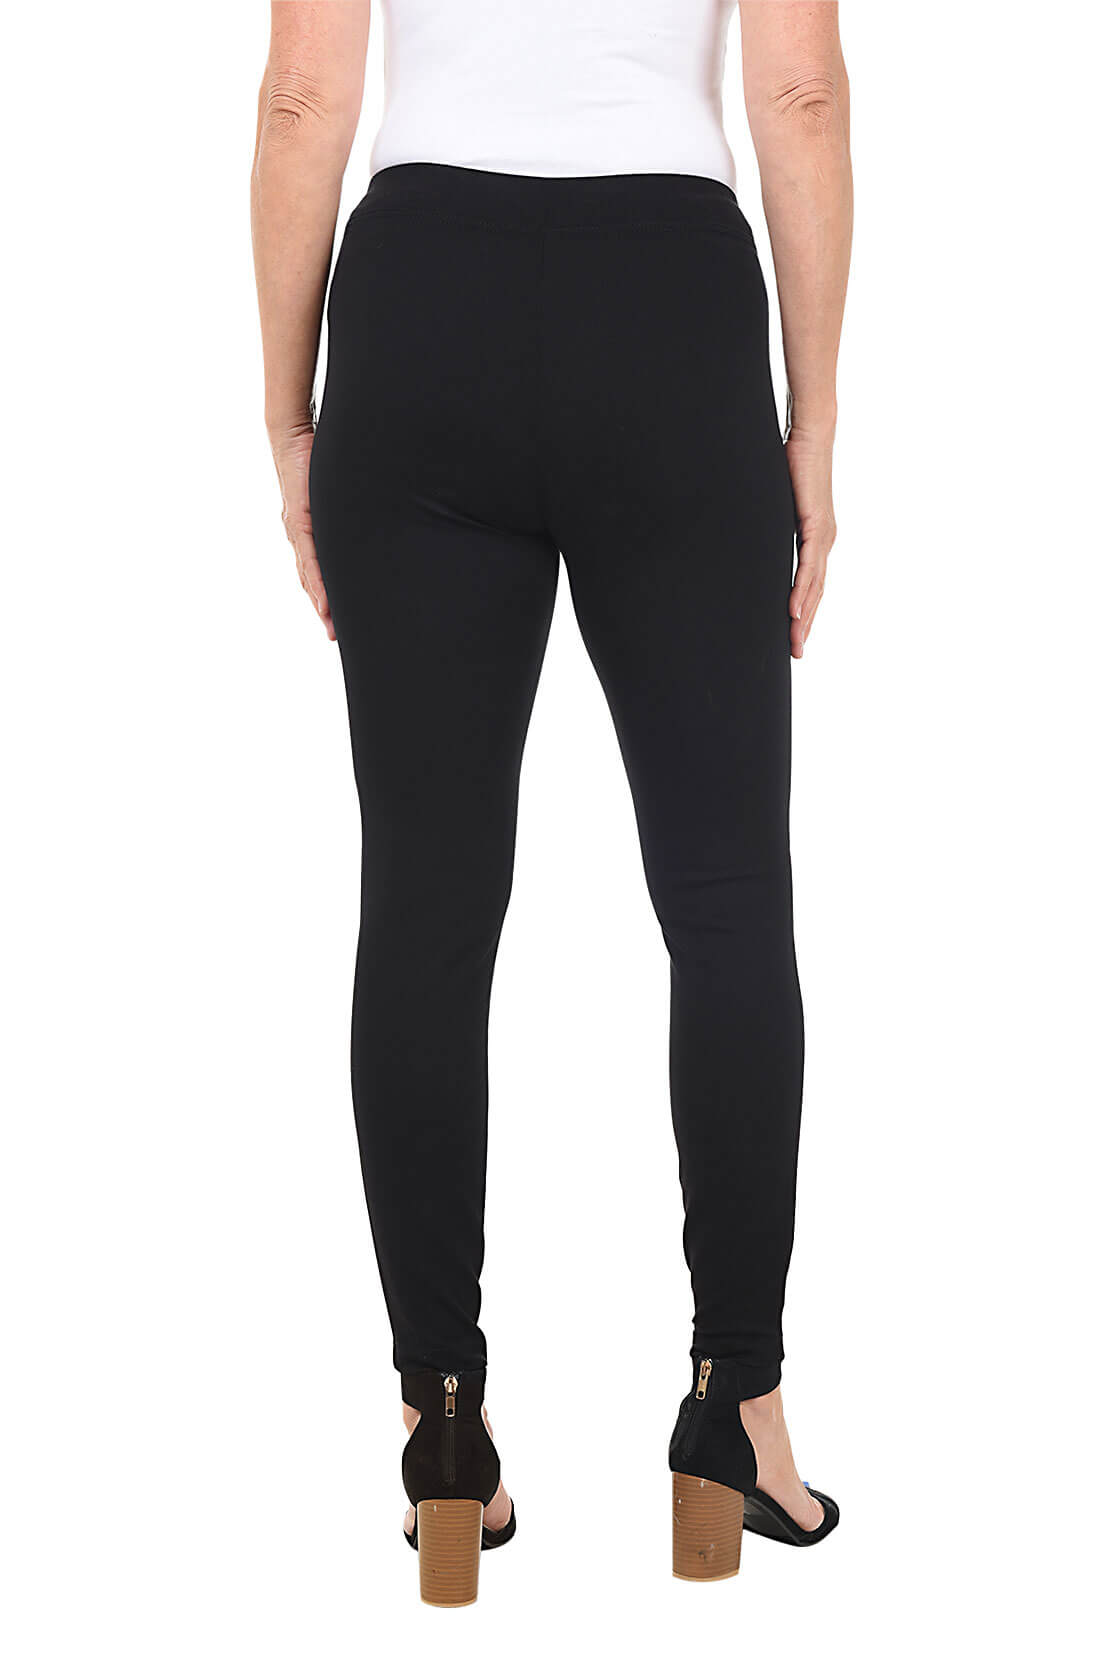 Pull-On Compression Ankle Pant